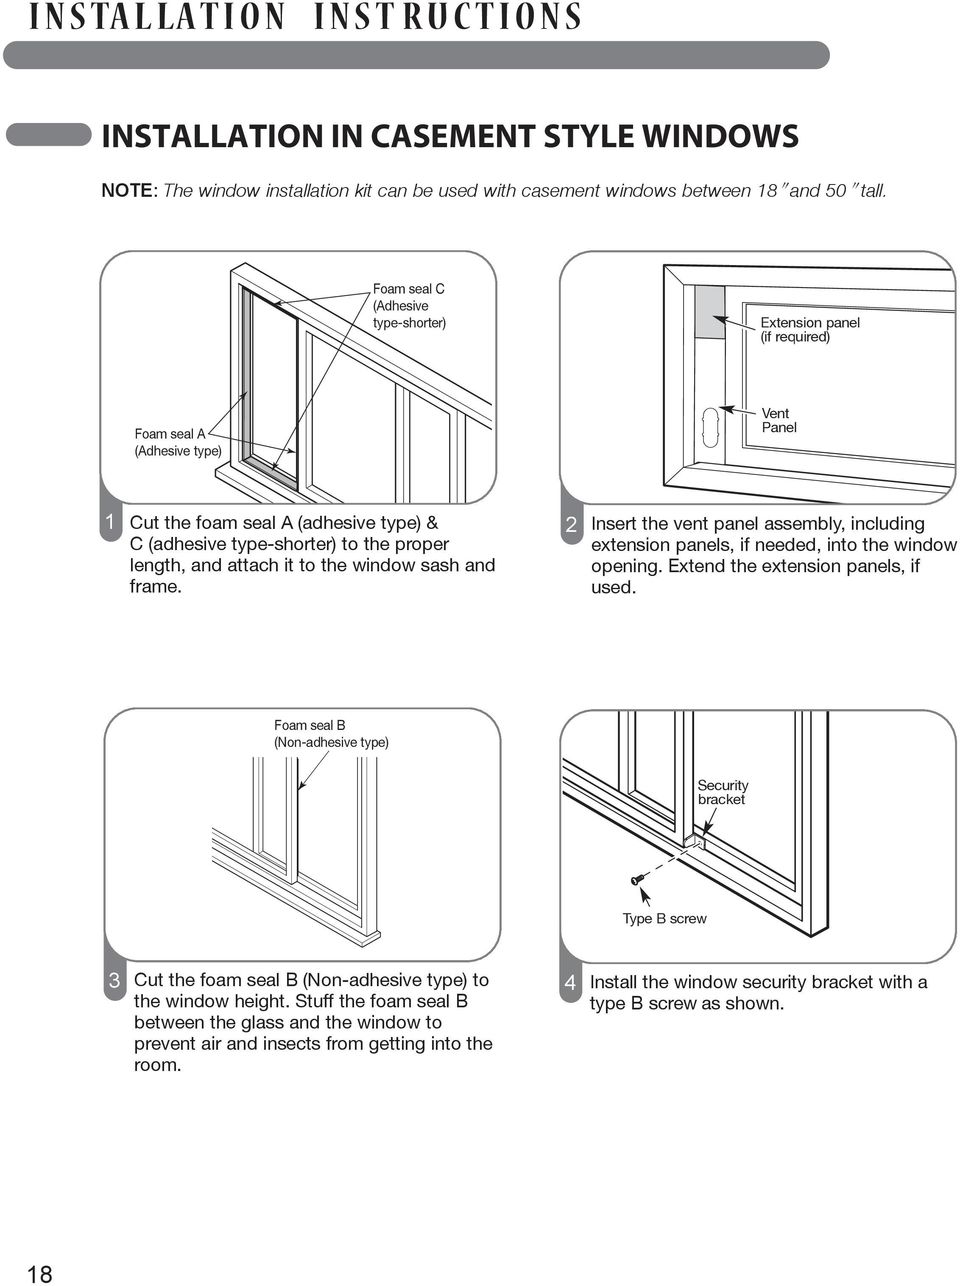 attach it to the window sash and frame. 2 Insert the vent panel assembly, including extension panels, if needed, into the window opening. Extend the extension panels, if used.